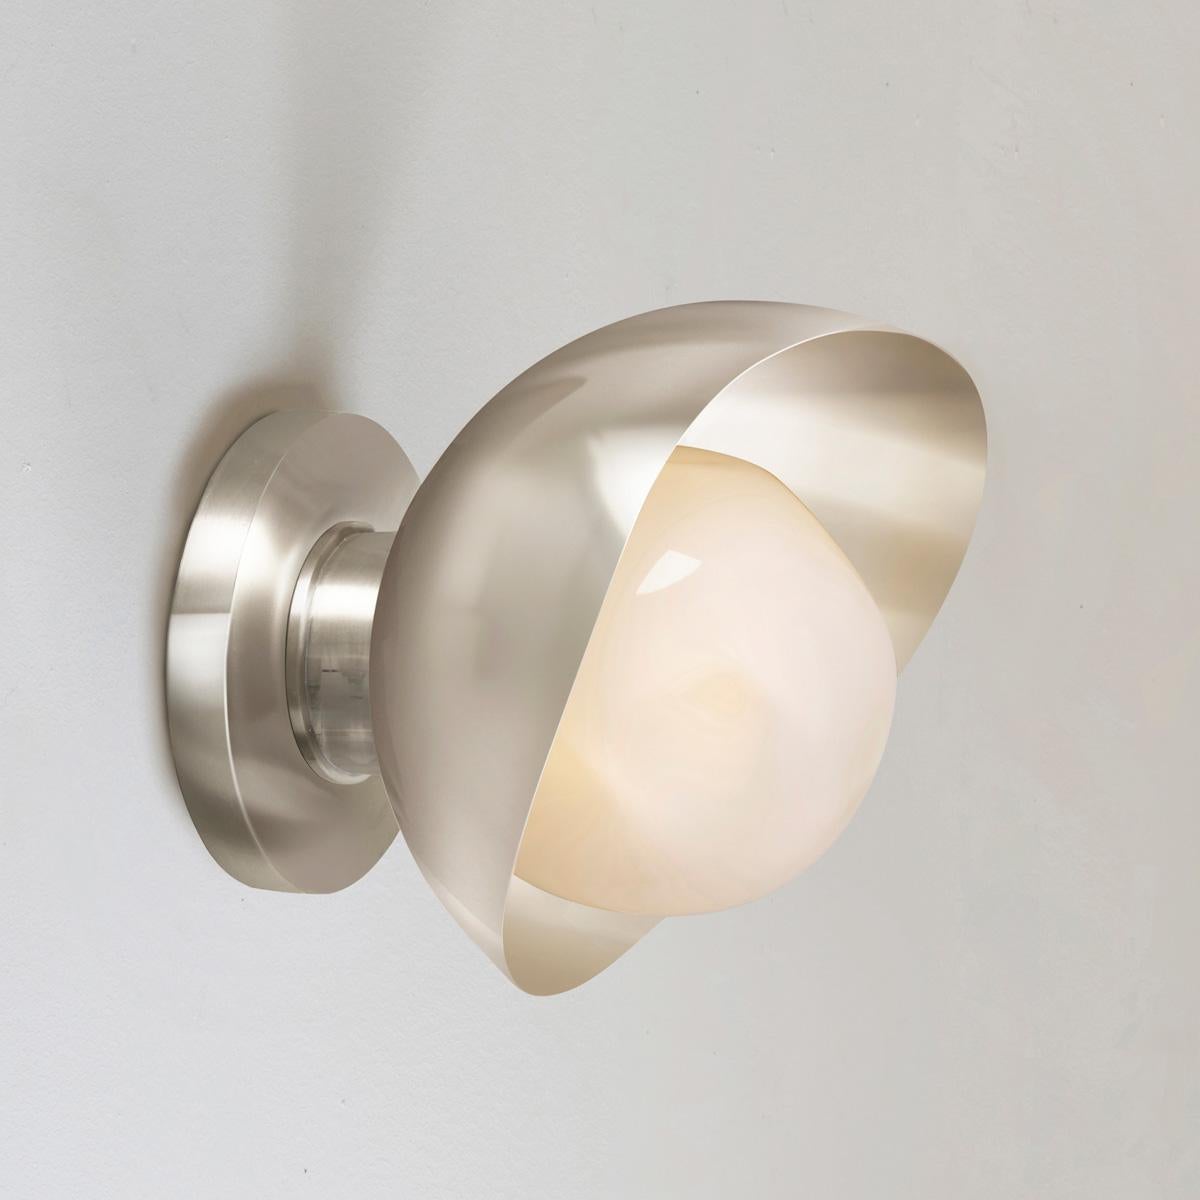 Contemporary Perla Mini Wall Light by Gaspare Asaro. Sand White and Satin Brass Finish For Sale